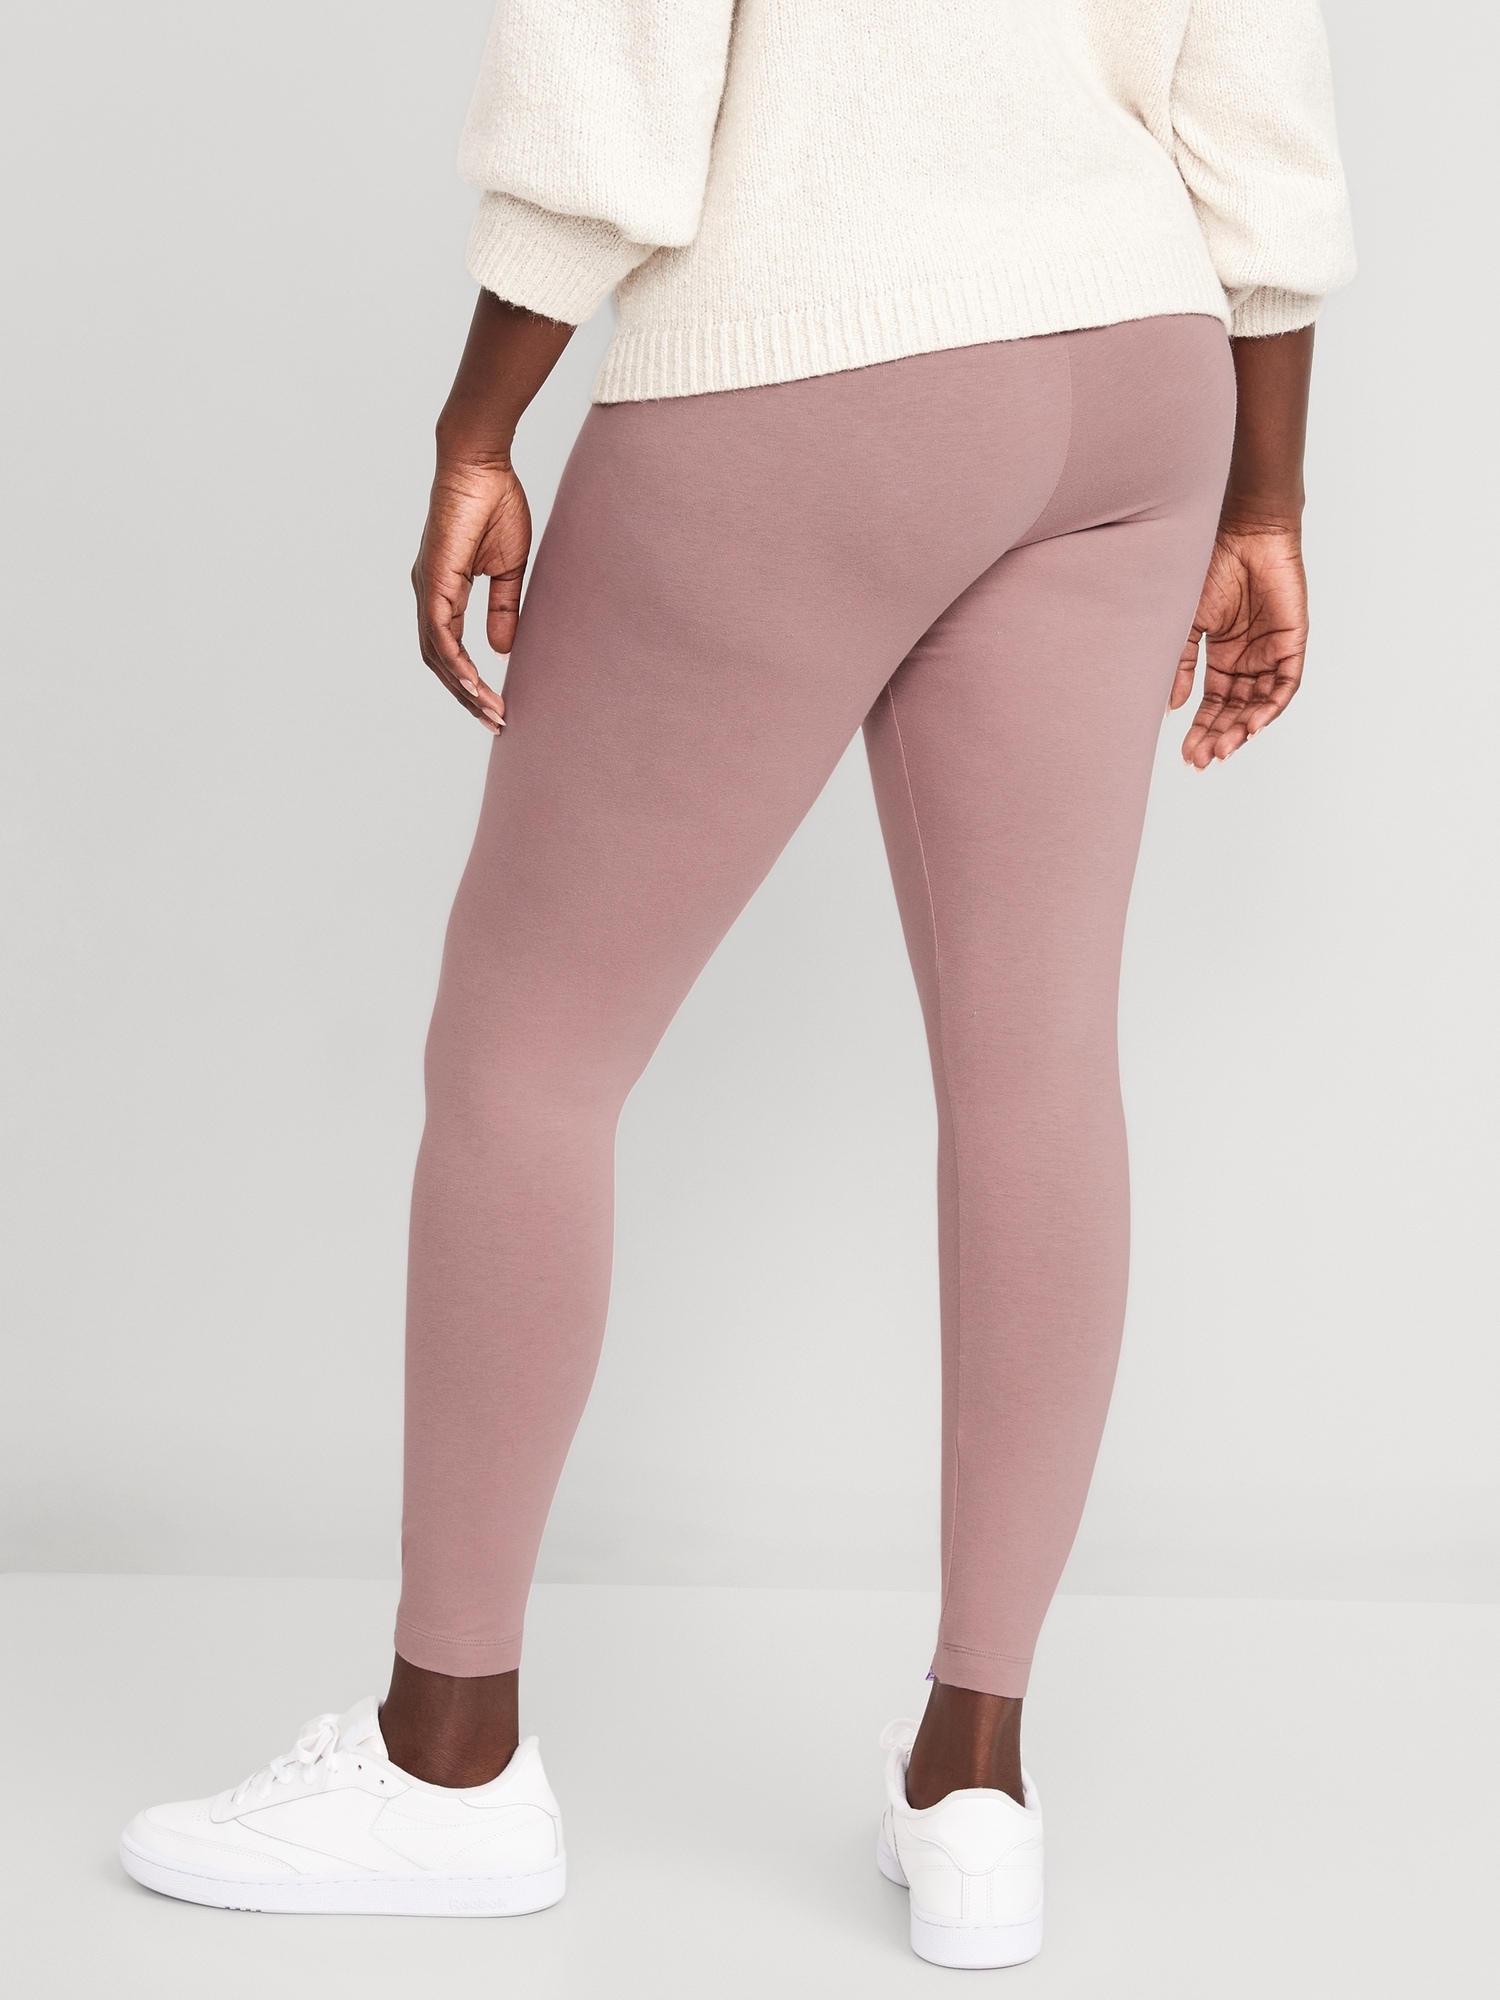 High Waisted Jersey Ankle Leggings For Women Old Navy 9134